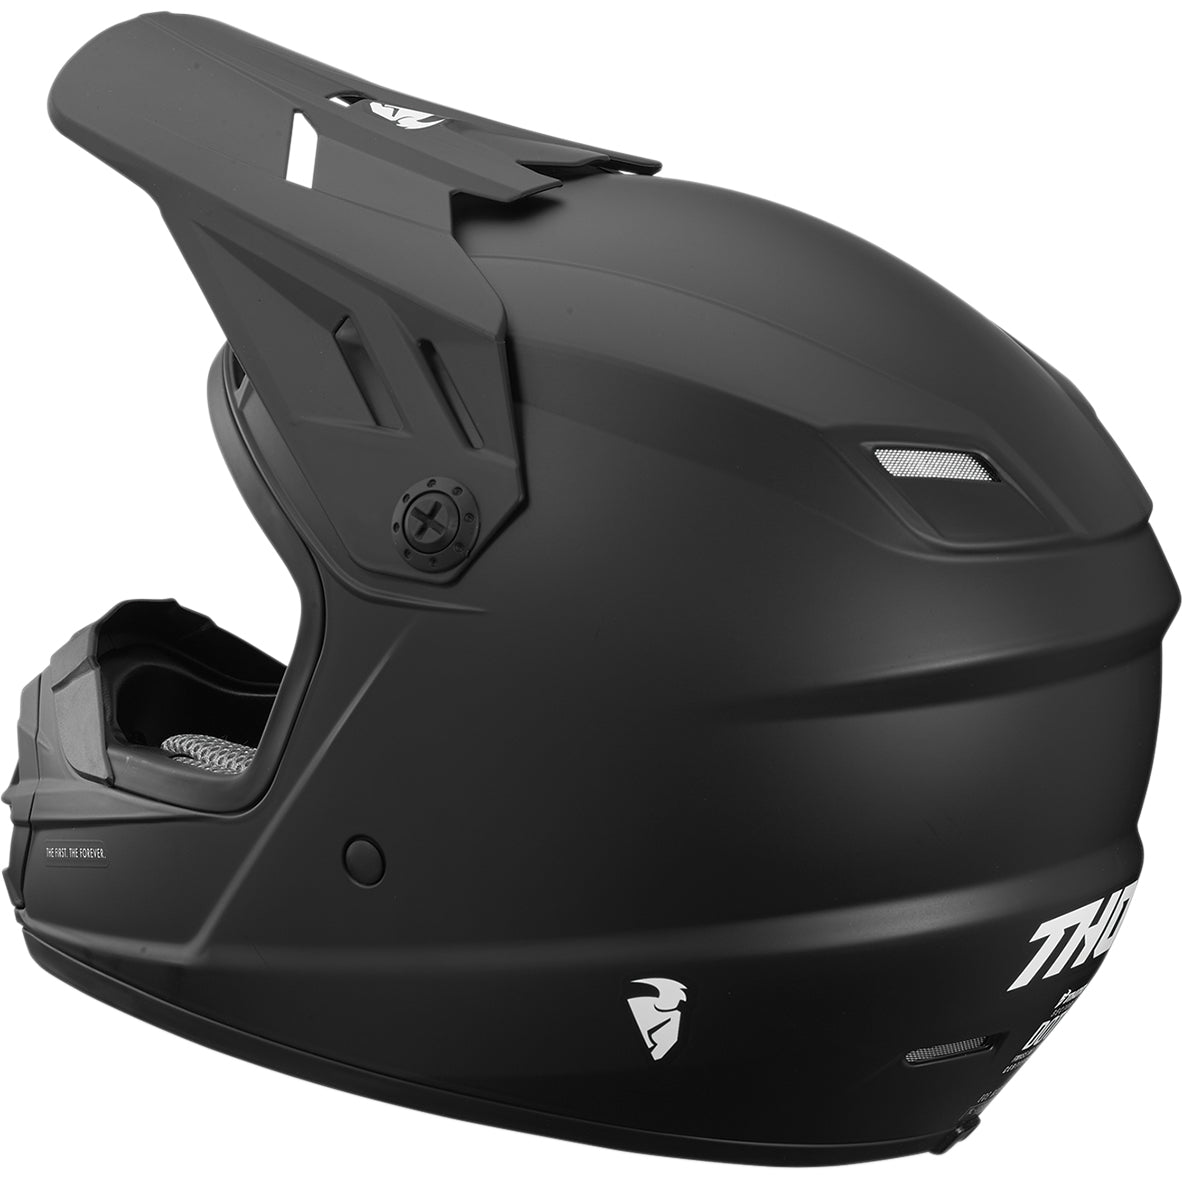 THOR Youth Sector Blackout Helmet